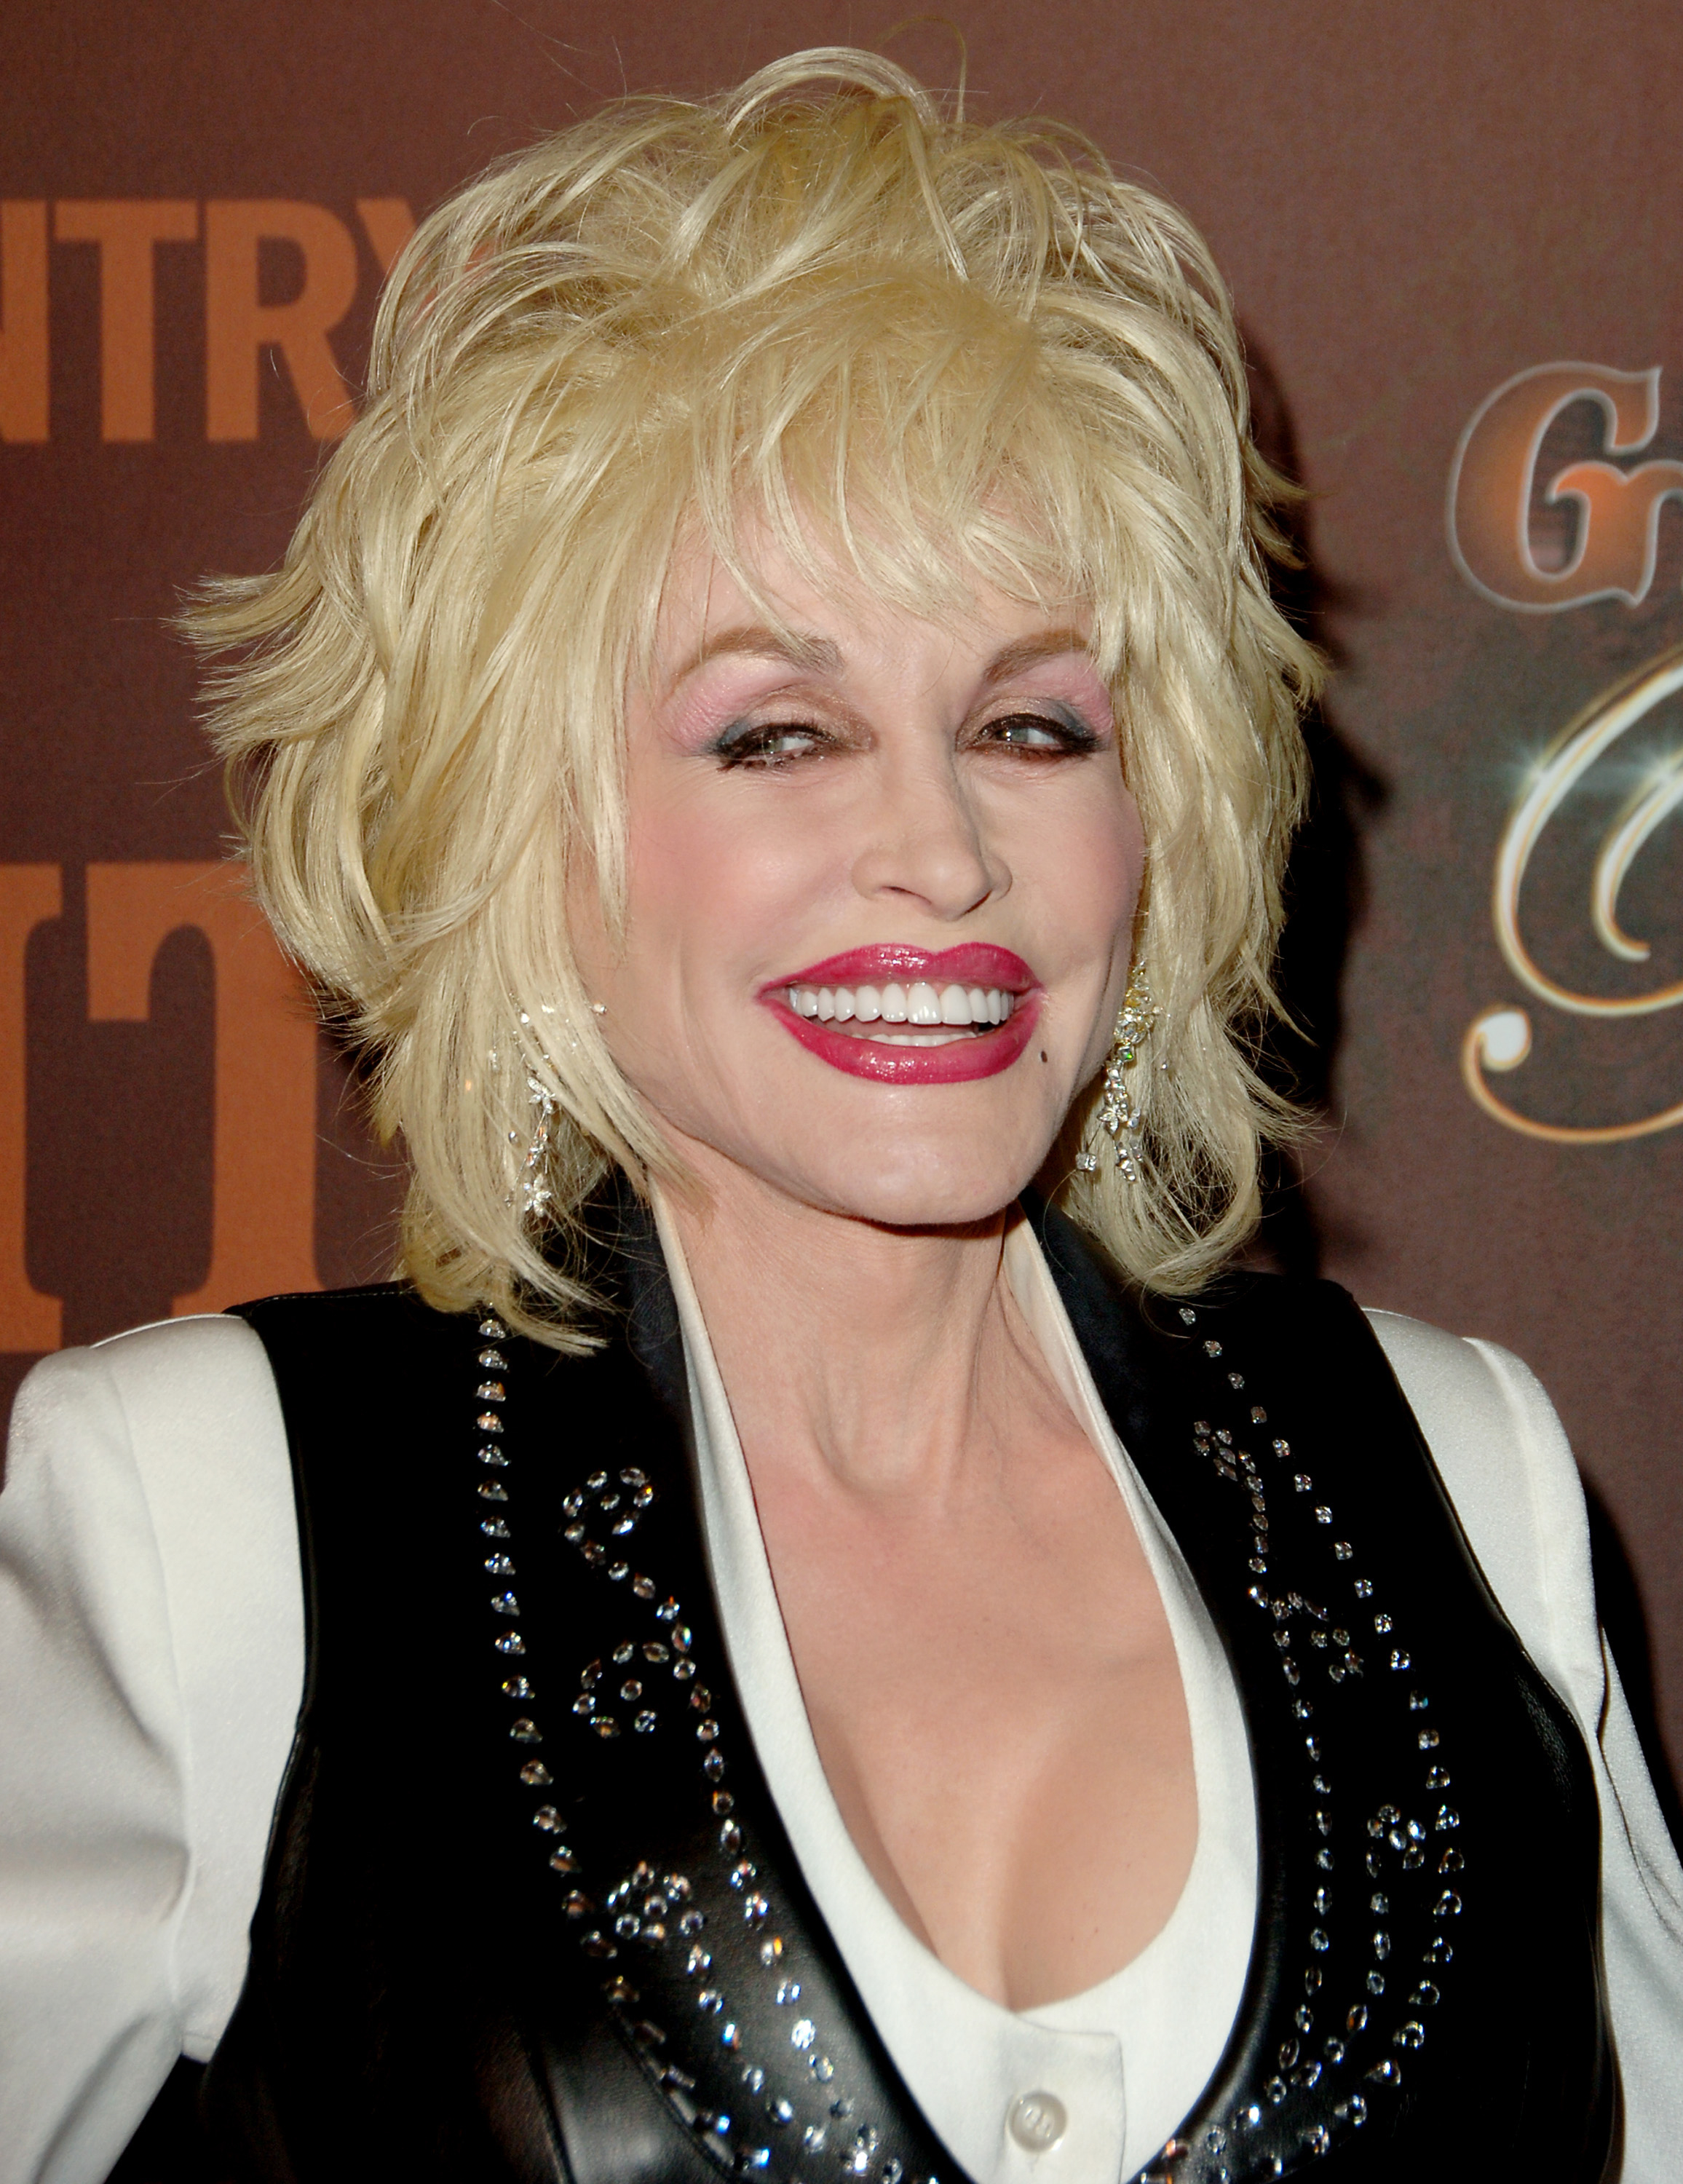 Close-up of Dolly smiling in a vest and blouse at a media event